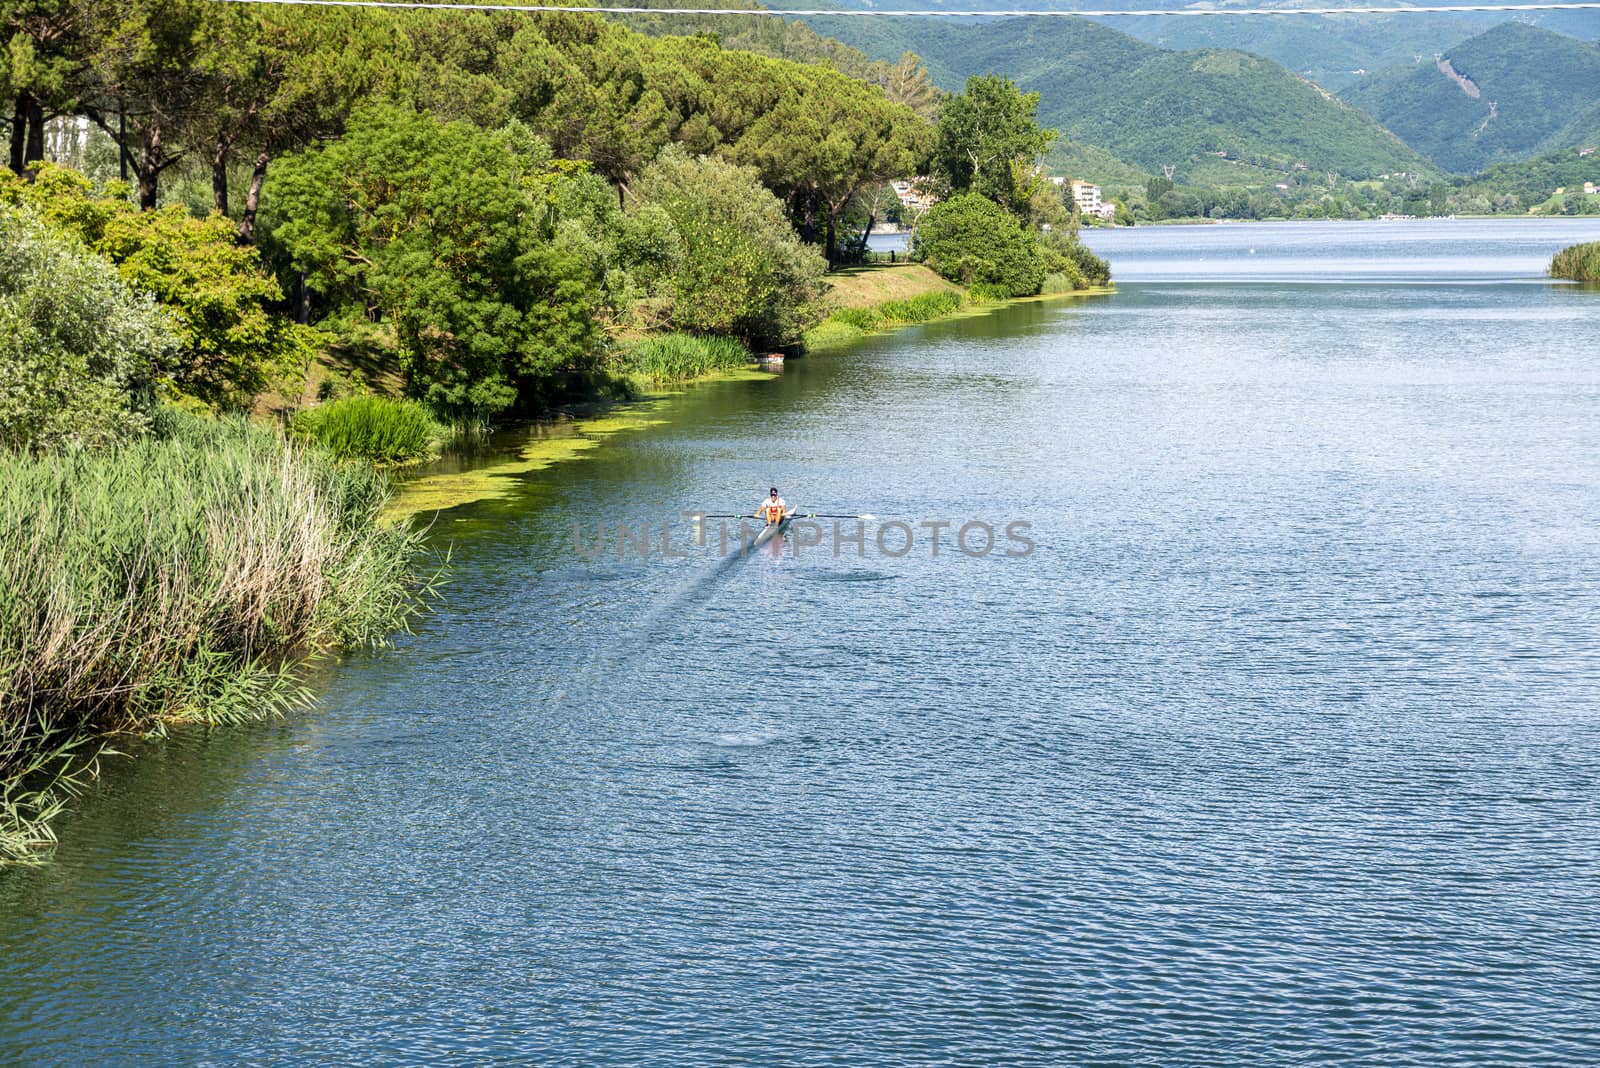 river velino which leads to the piediluco lake by carfedeph